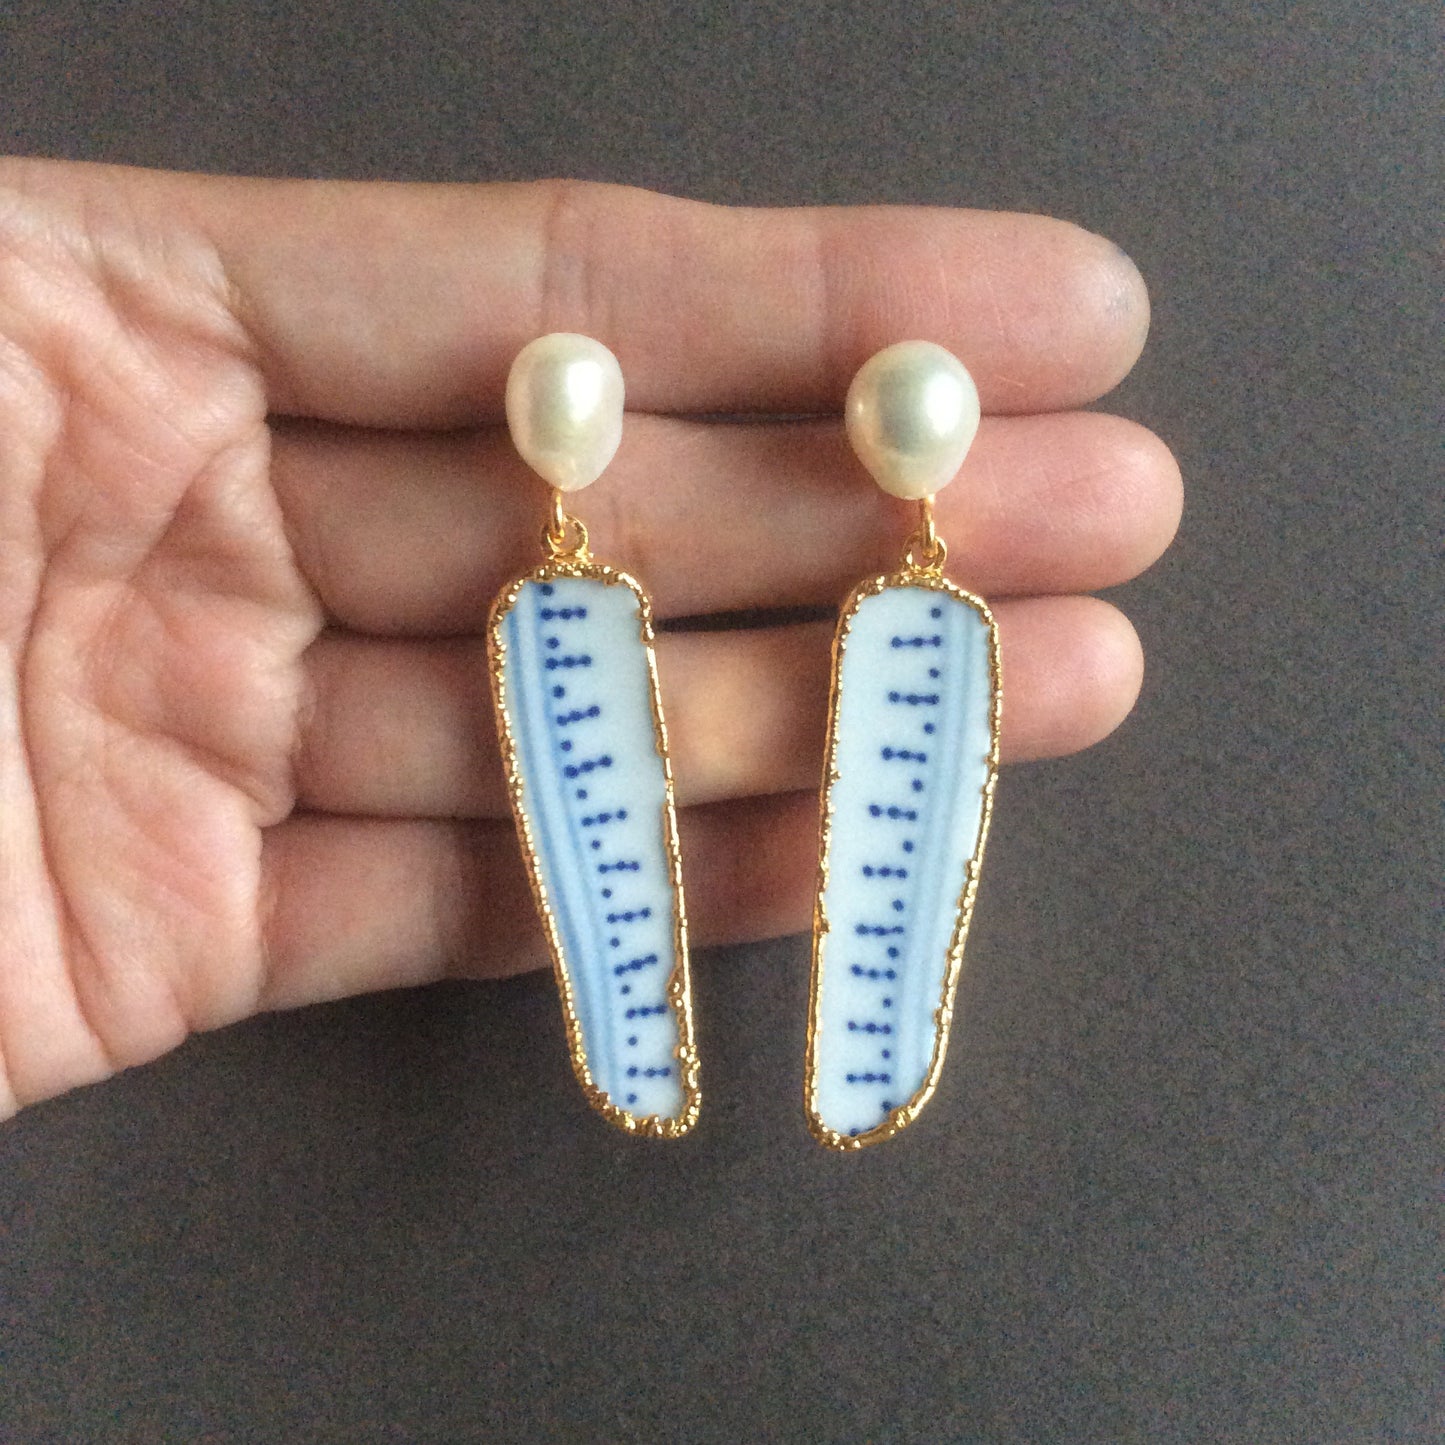 Elongated chinoiserie porcelain earrings with freshwater pearls